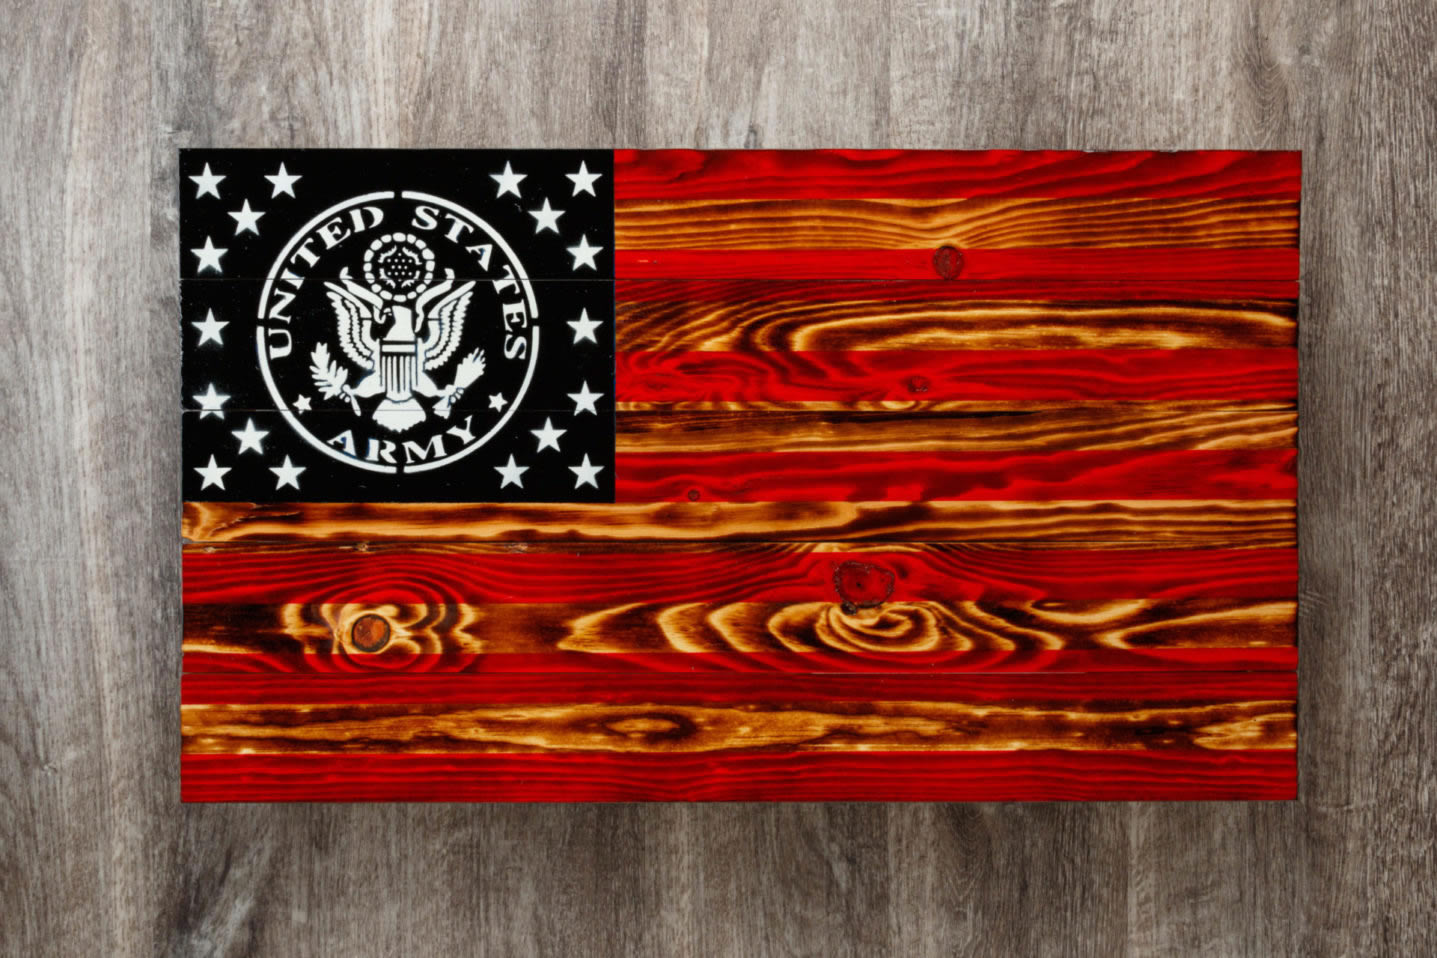 Wooden army flag torched